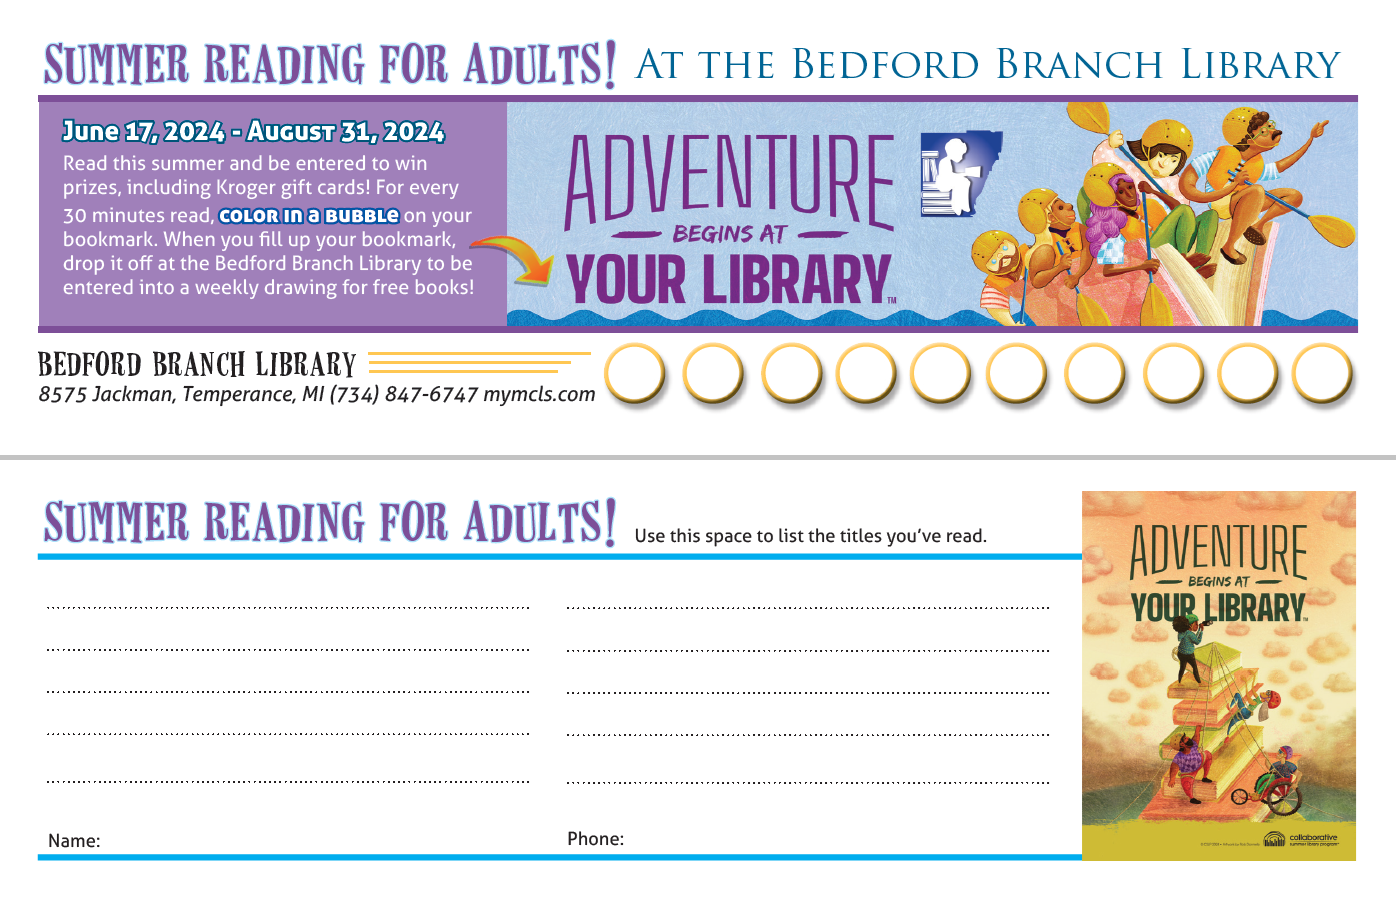 Adult Summer Reading Card at Bedford